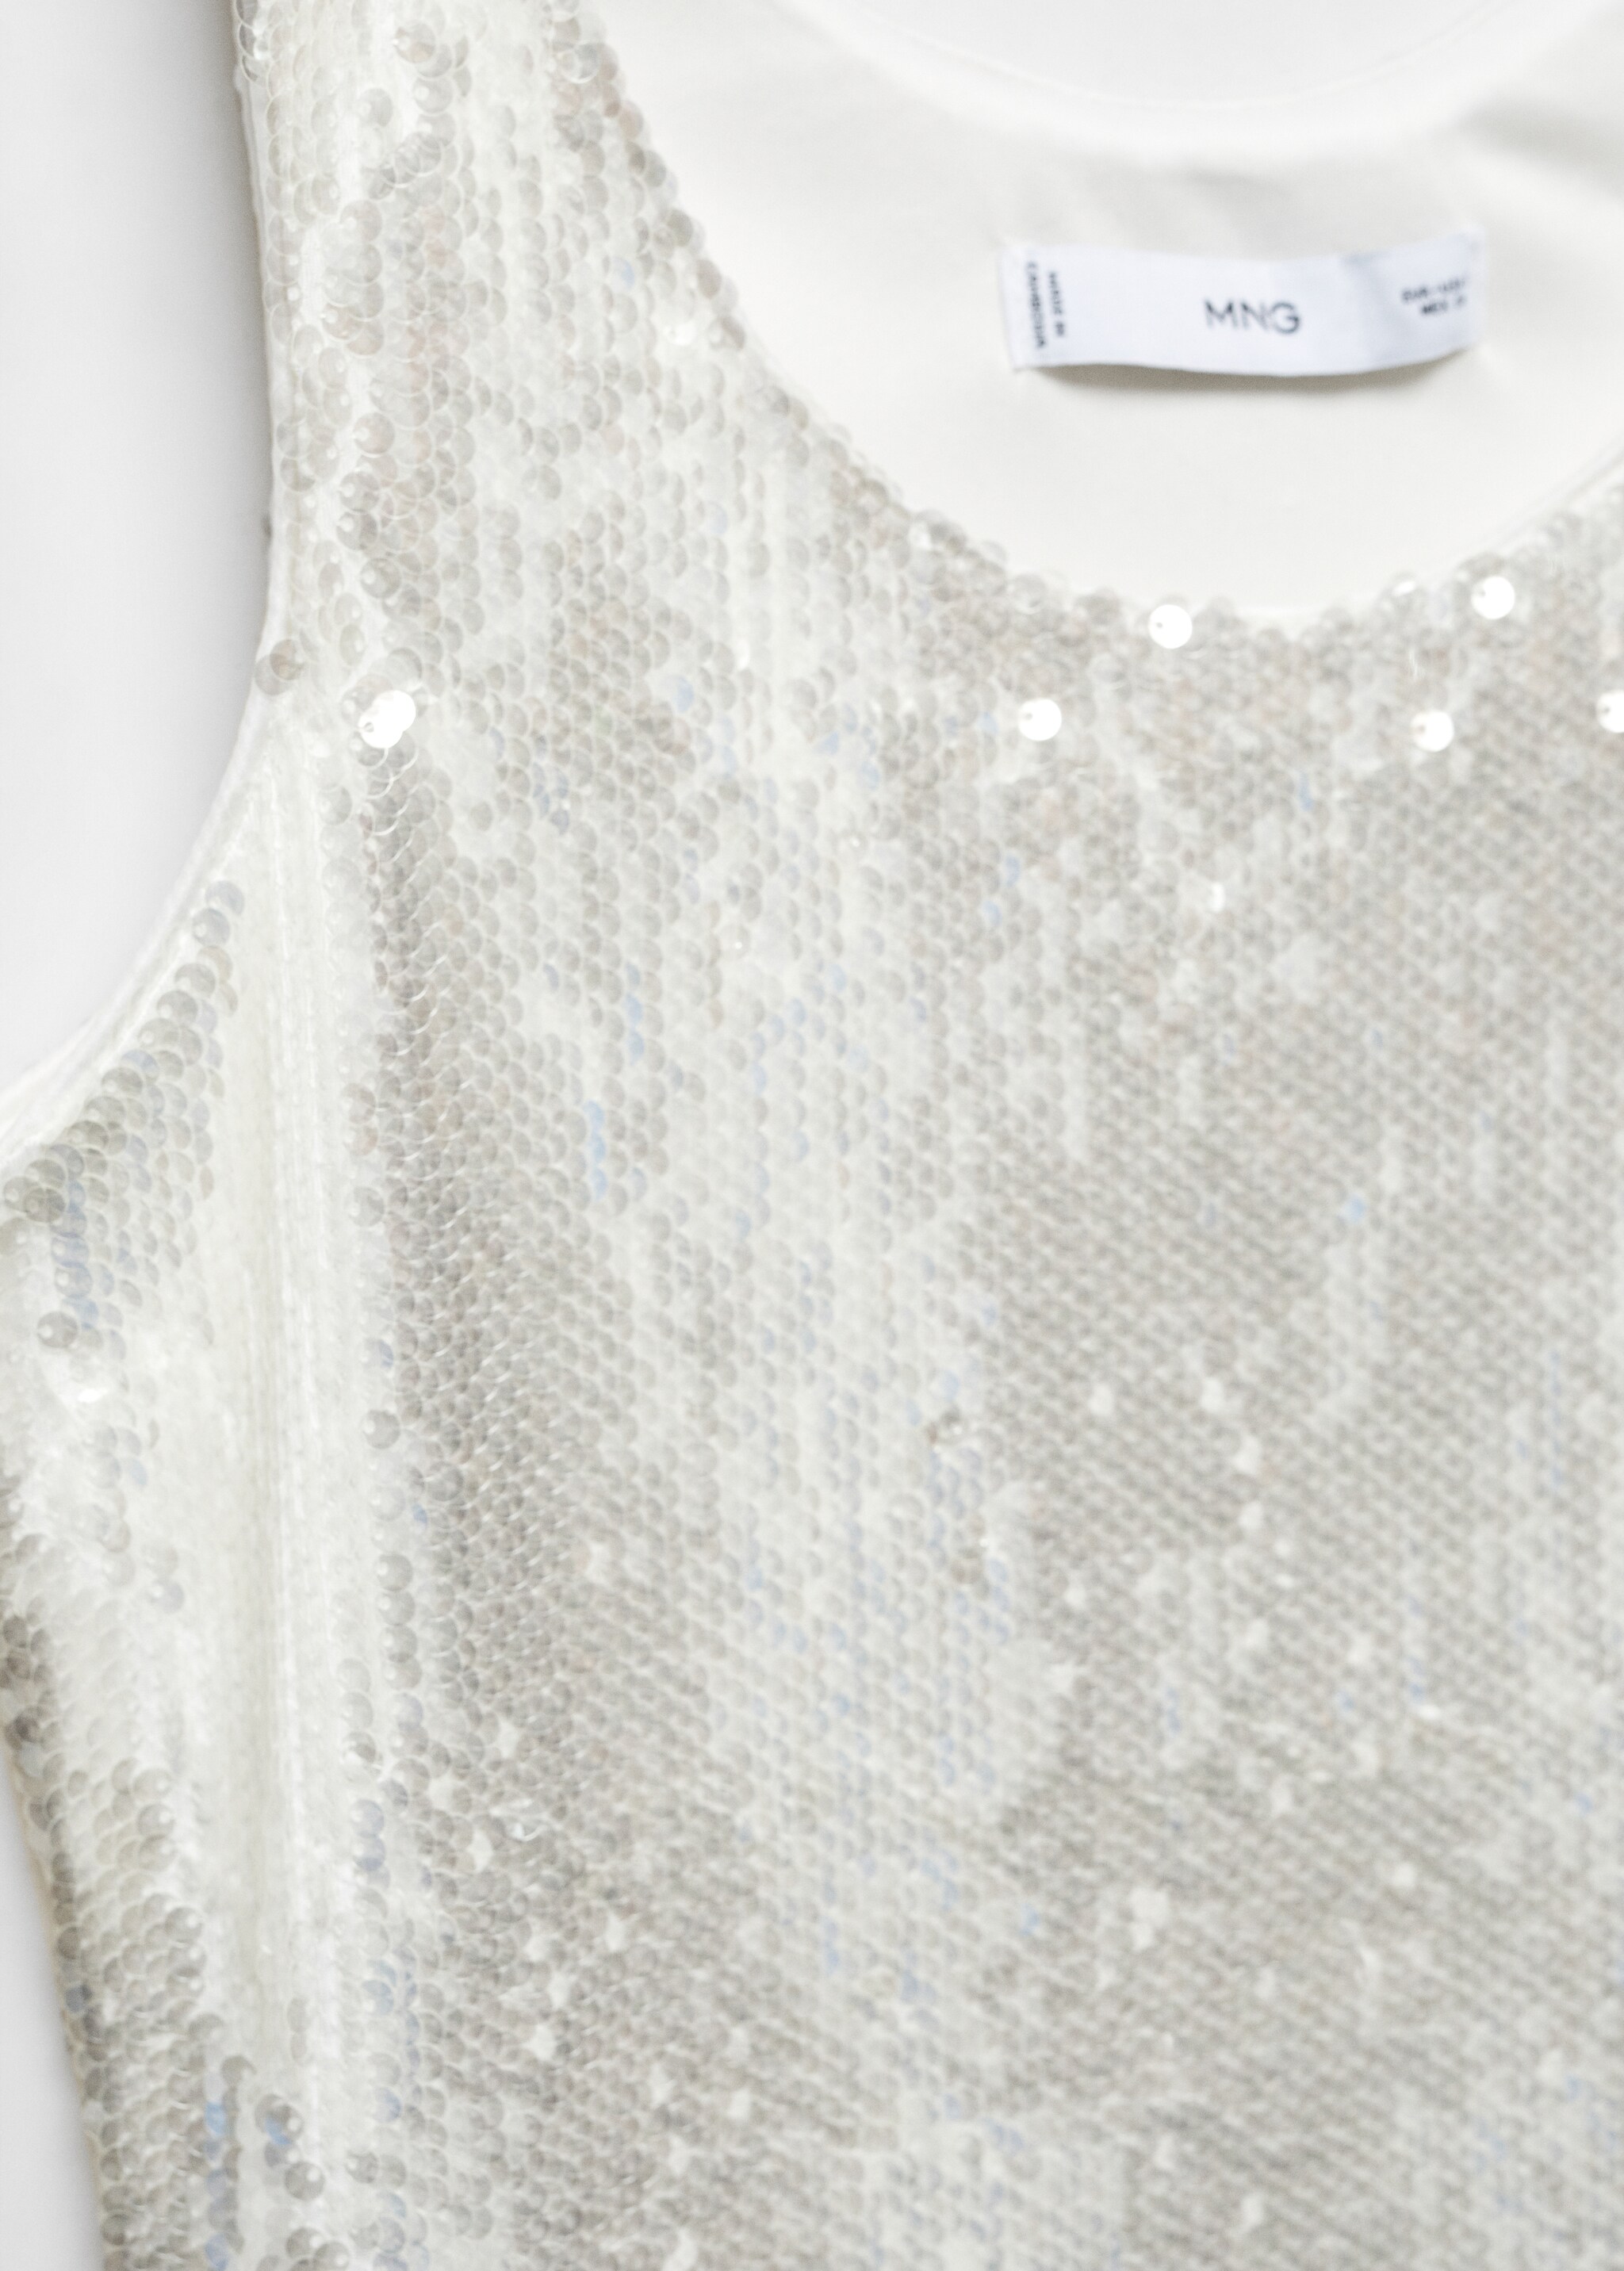 Sequined strap top - Details of the article 8